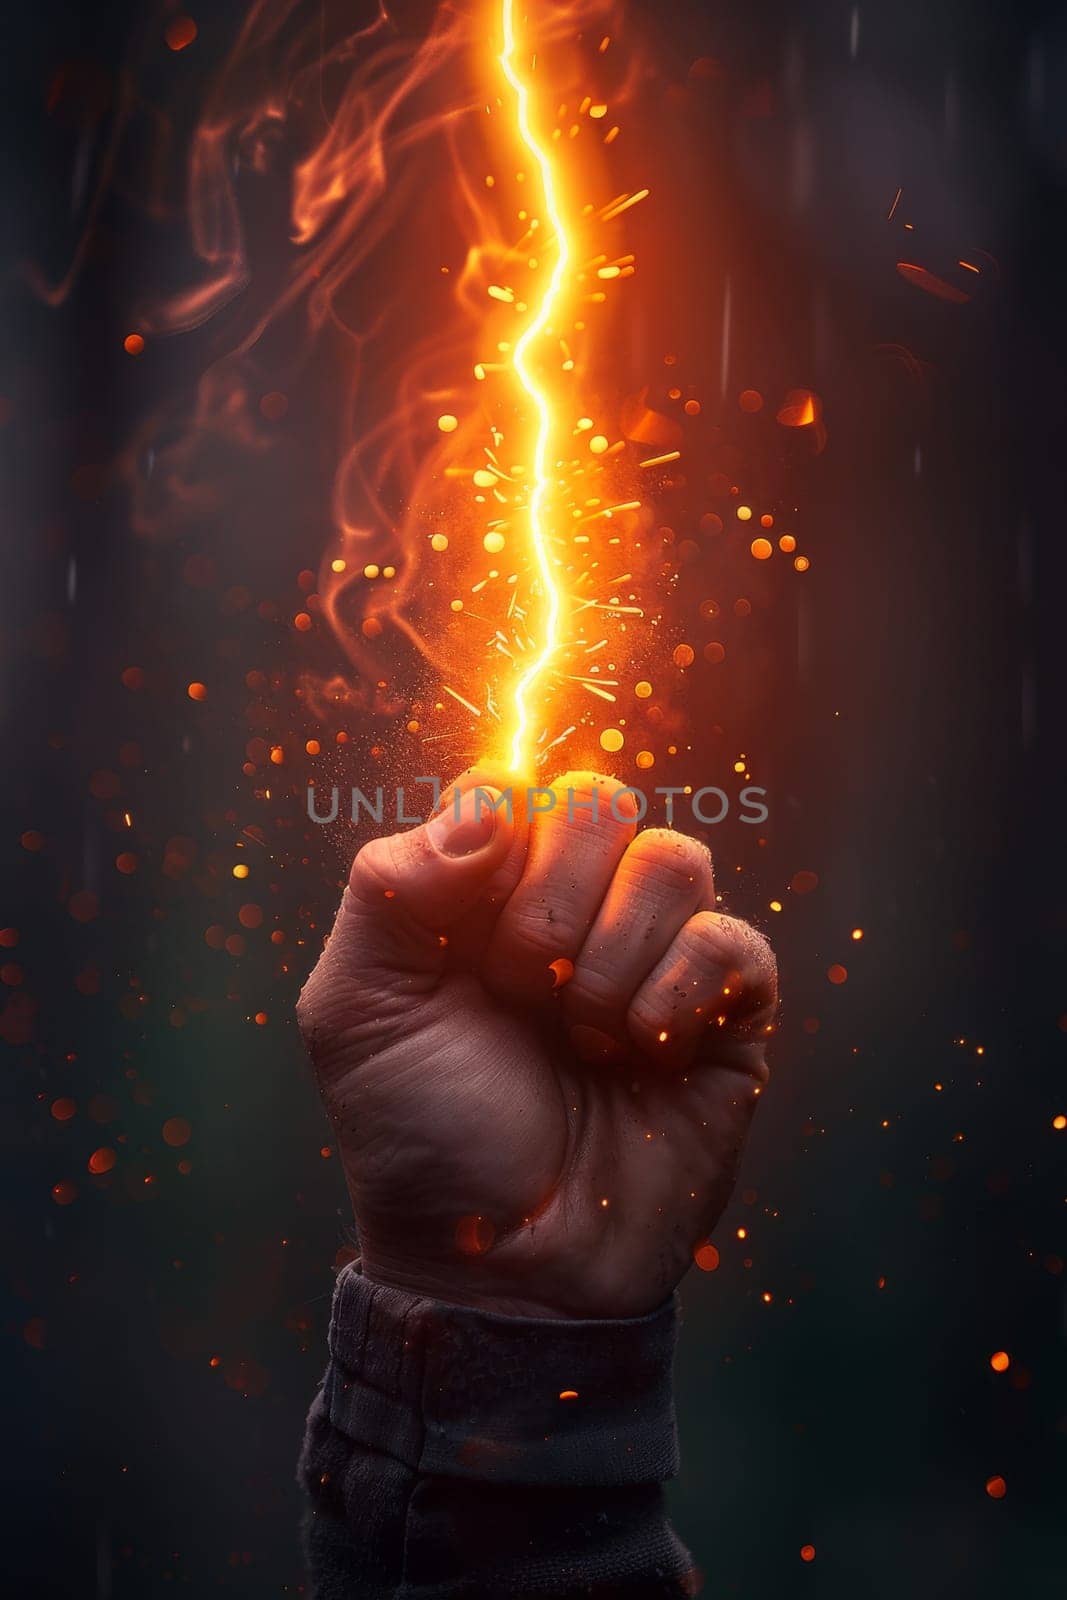 A hand is shown with a fist raised, surrounded by sparks and smoke. Concept of power and energy, as if the person is harnessing the power of the fire. The sparks and smoke add to the dramatic effect